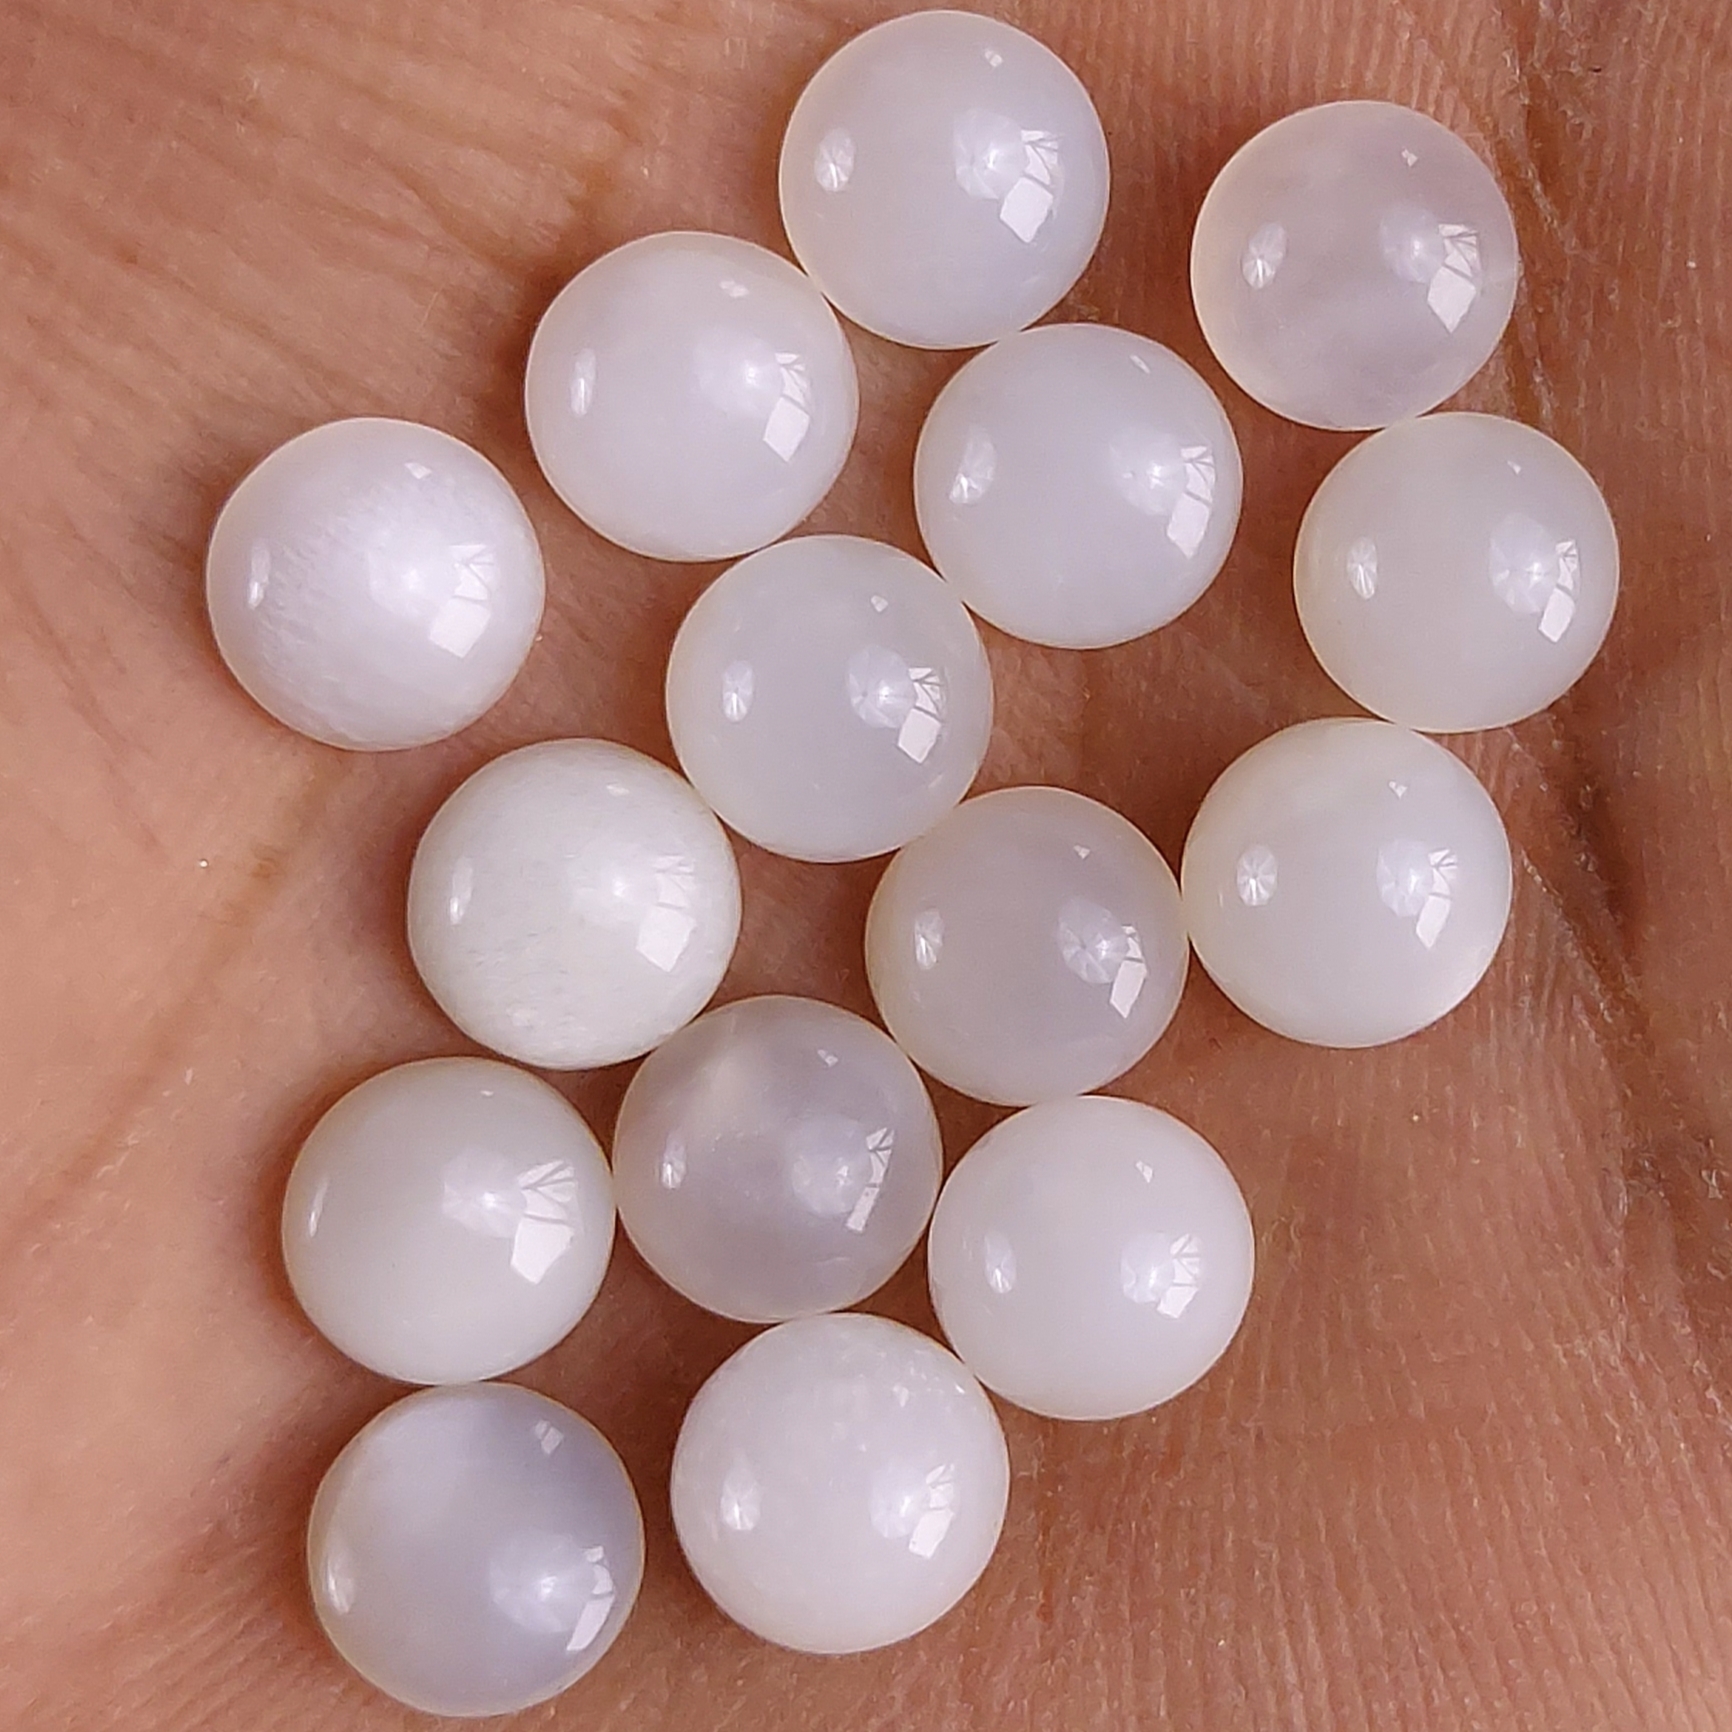 15Pcs 29Cts Natural White Moonstone Loose Cabochon Round Shape Gemstone For Jewelry Making Lot 5x5 mm#645